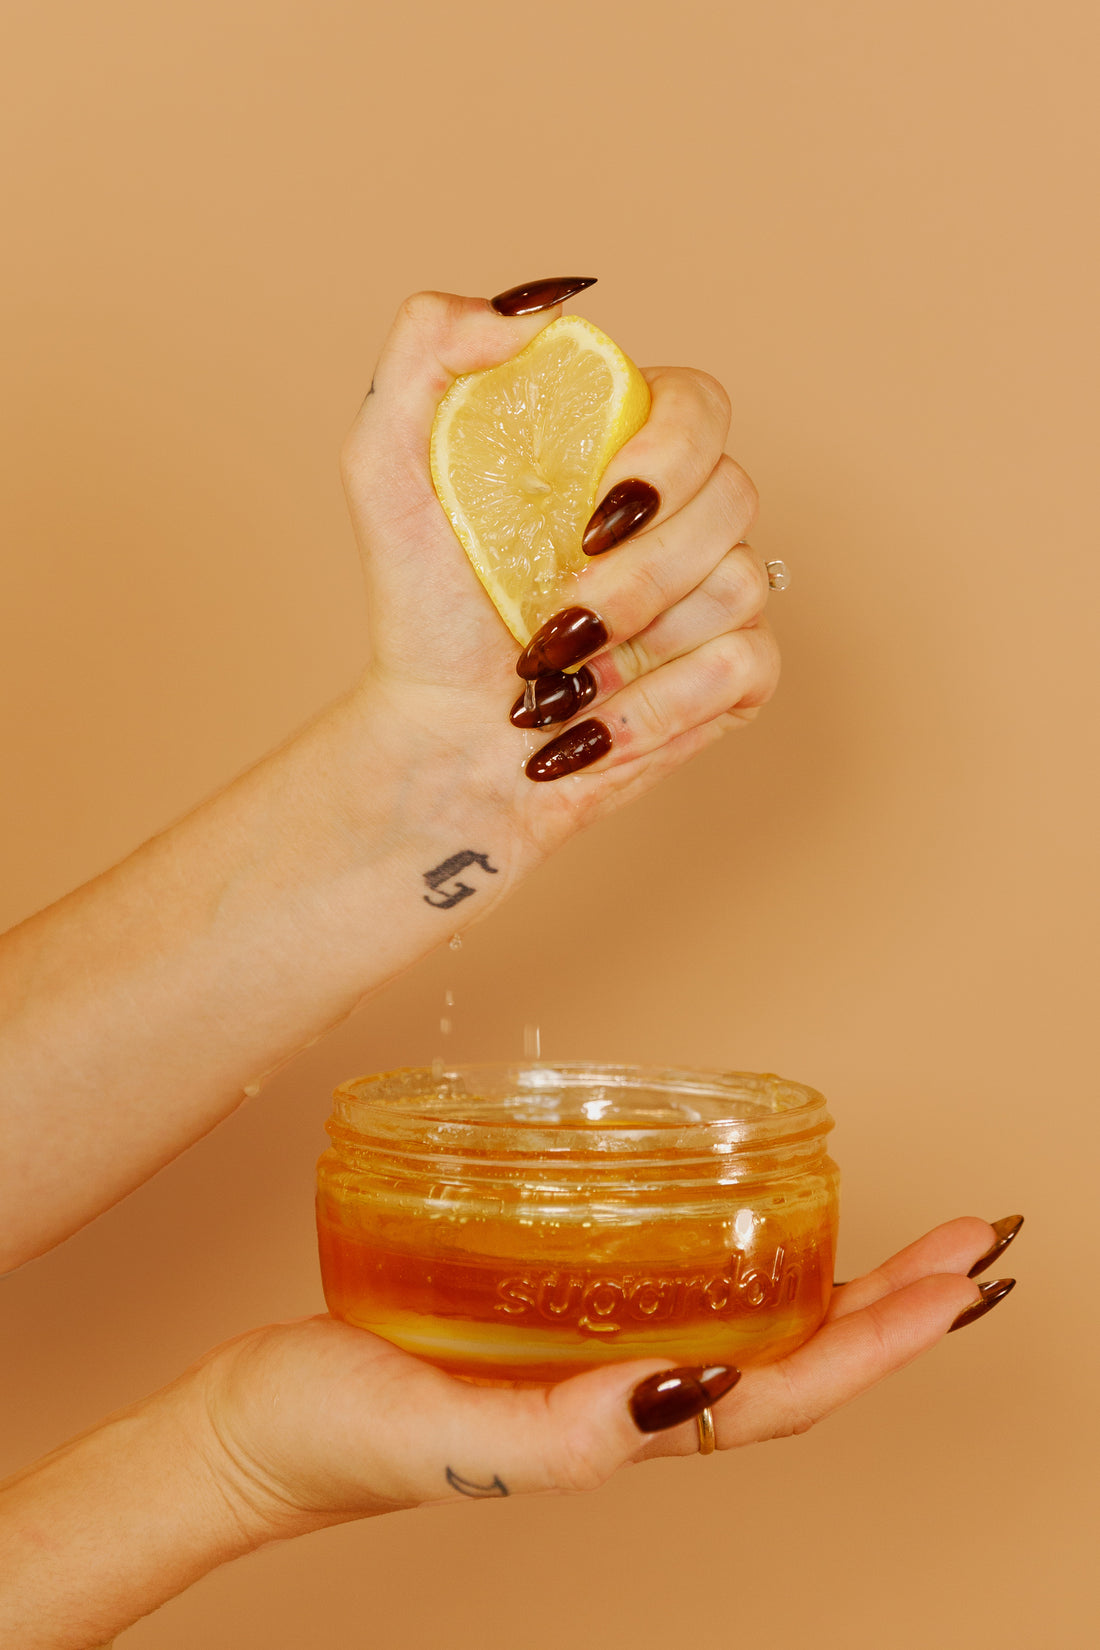 How to Sugar Wax Yourself at Home